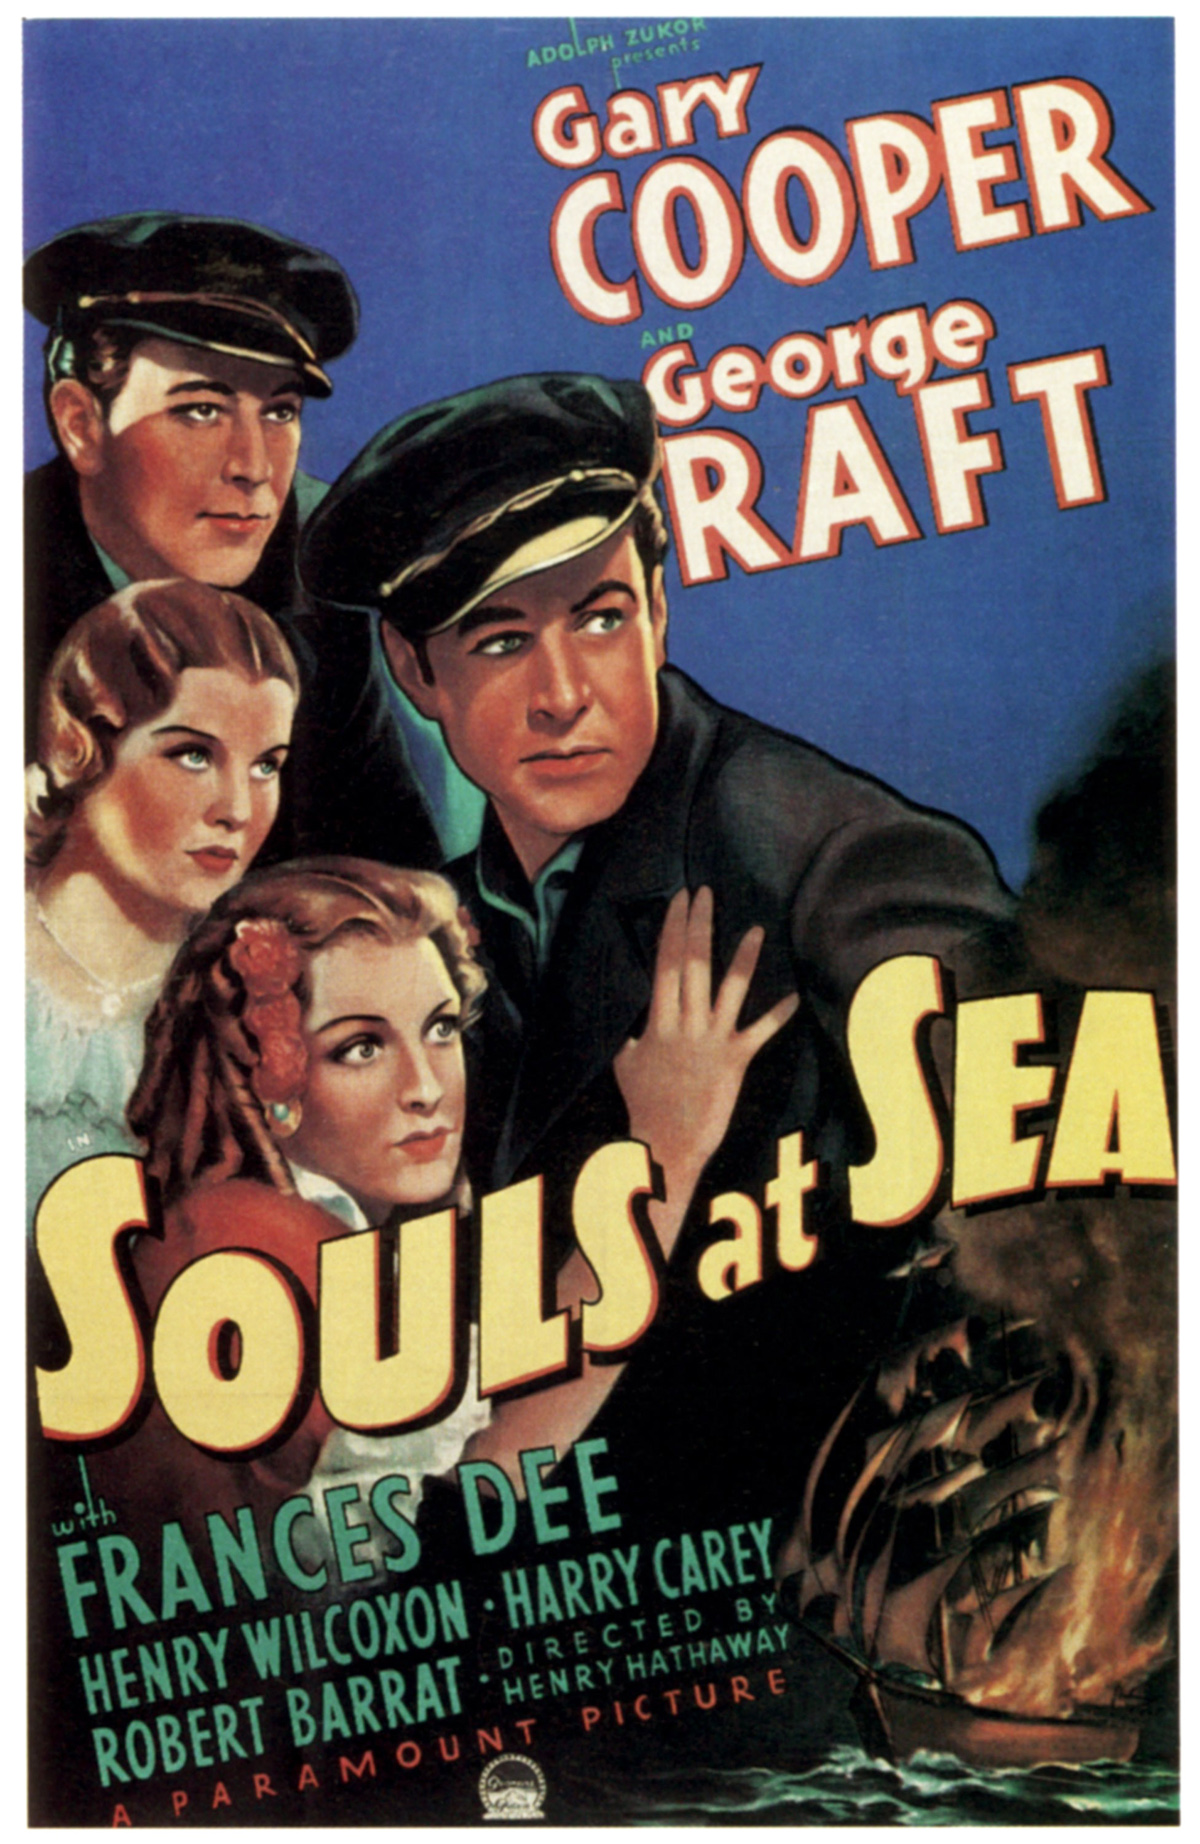 Still of Gary Cooper, Olympe Bradna, Frances Dee and George Raft in Souls at Sea (1937)